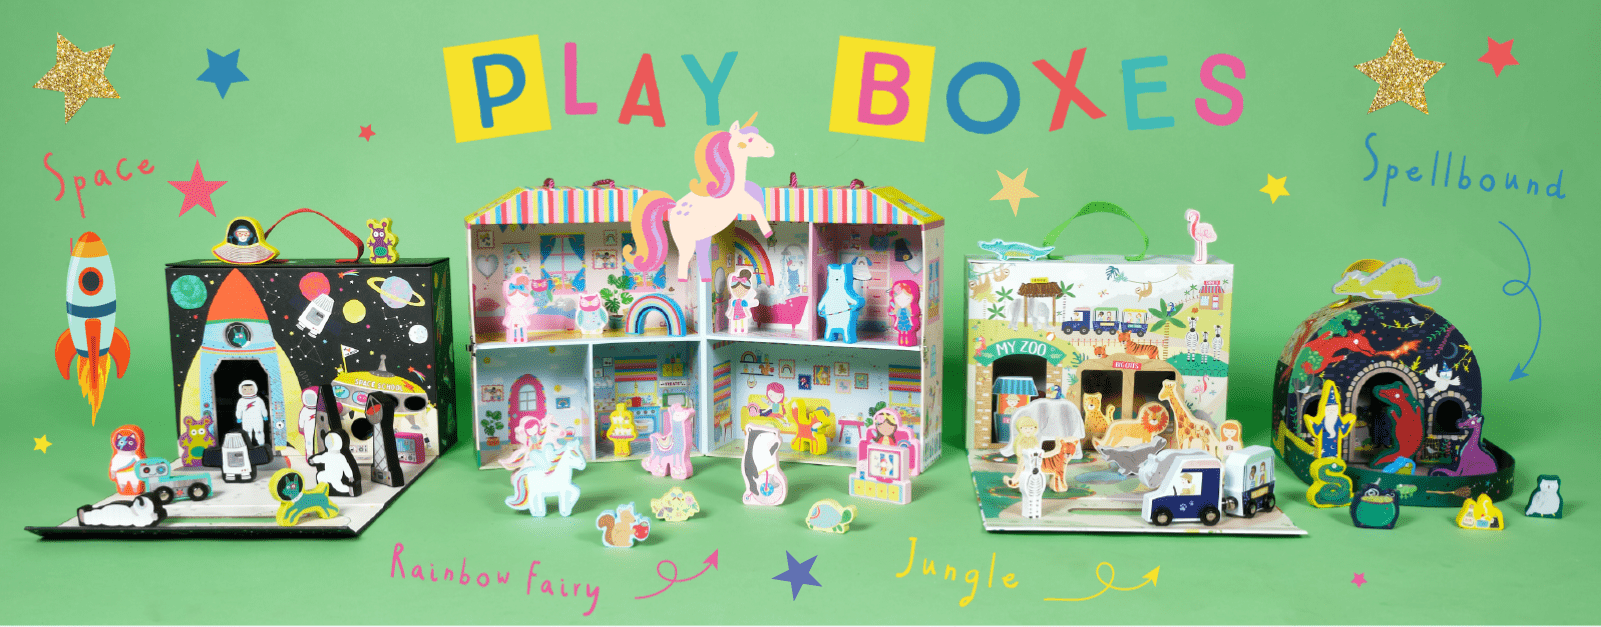 Floss and rock Play boxes banner